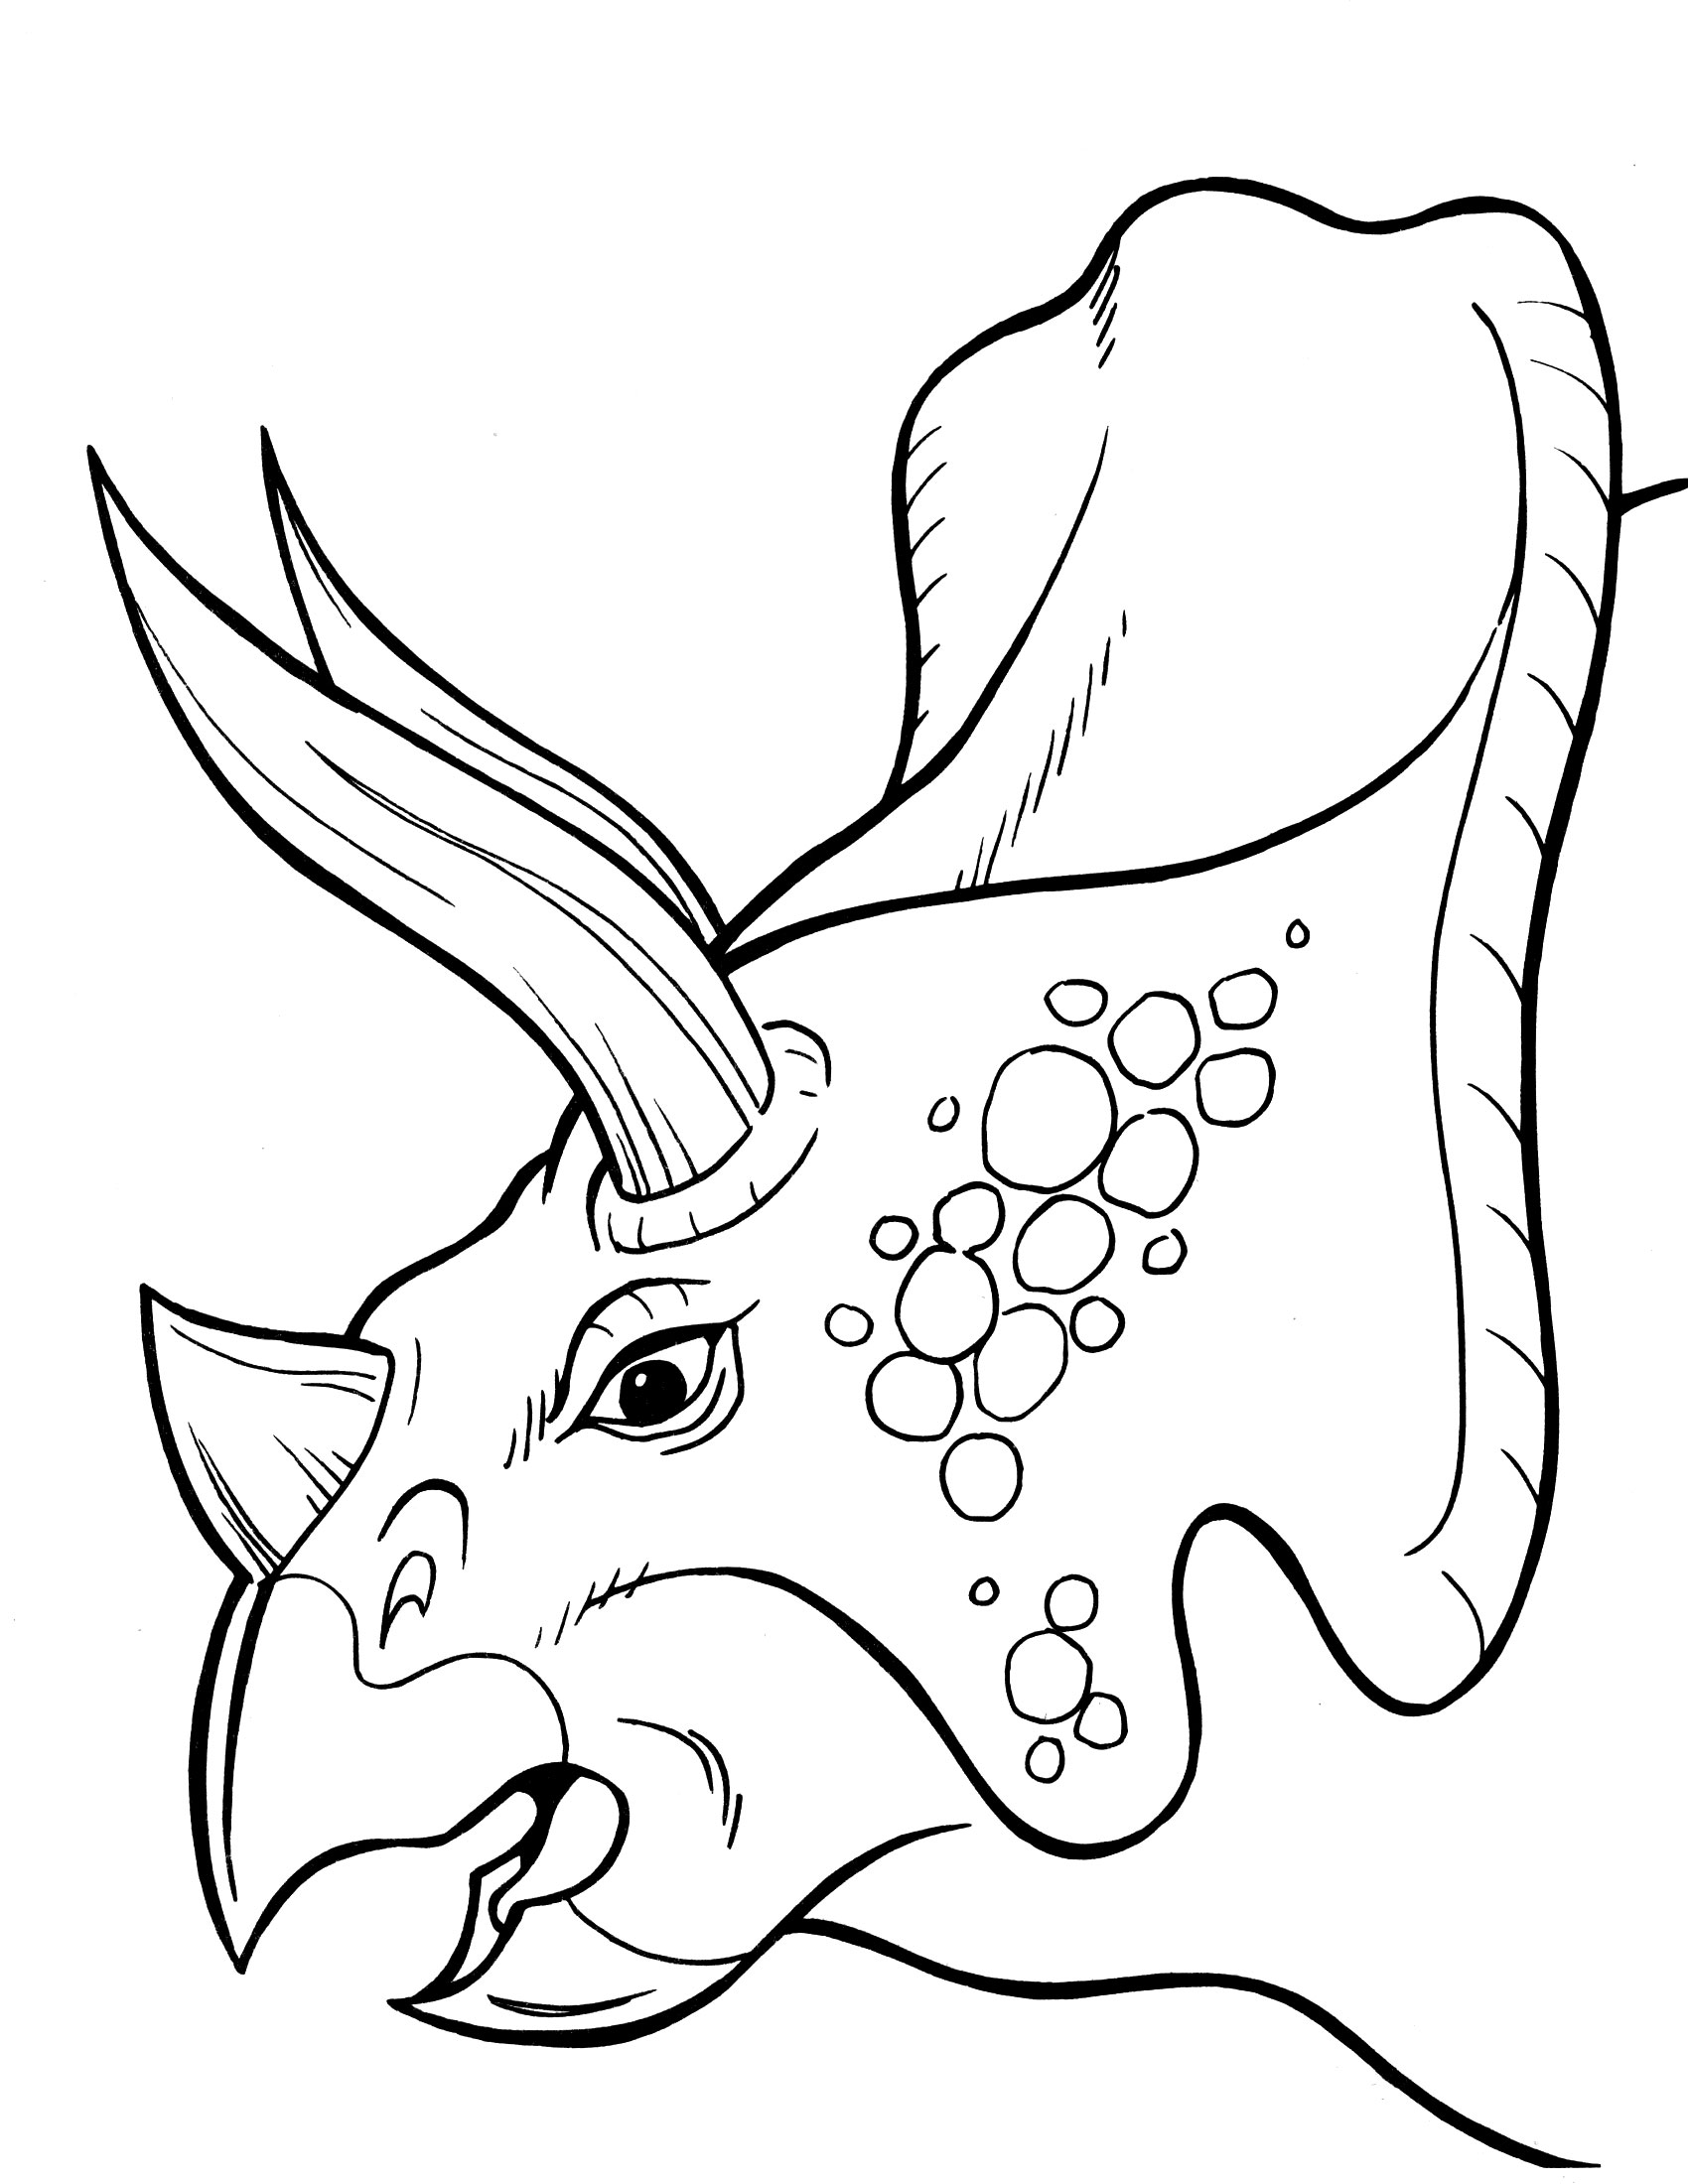 birthday cake coloring pages id 43494 : Uncategorized - yoand.